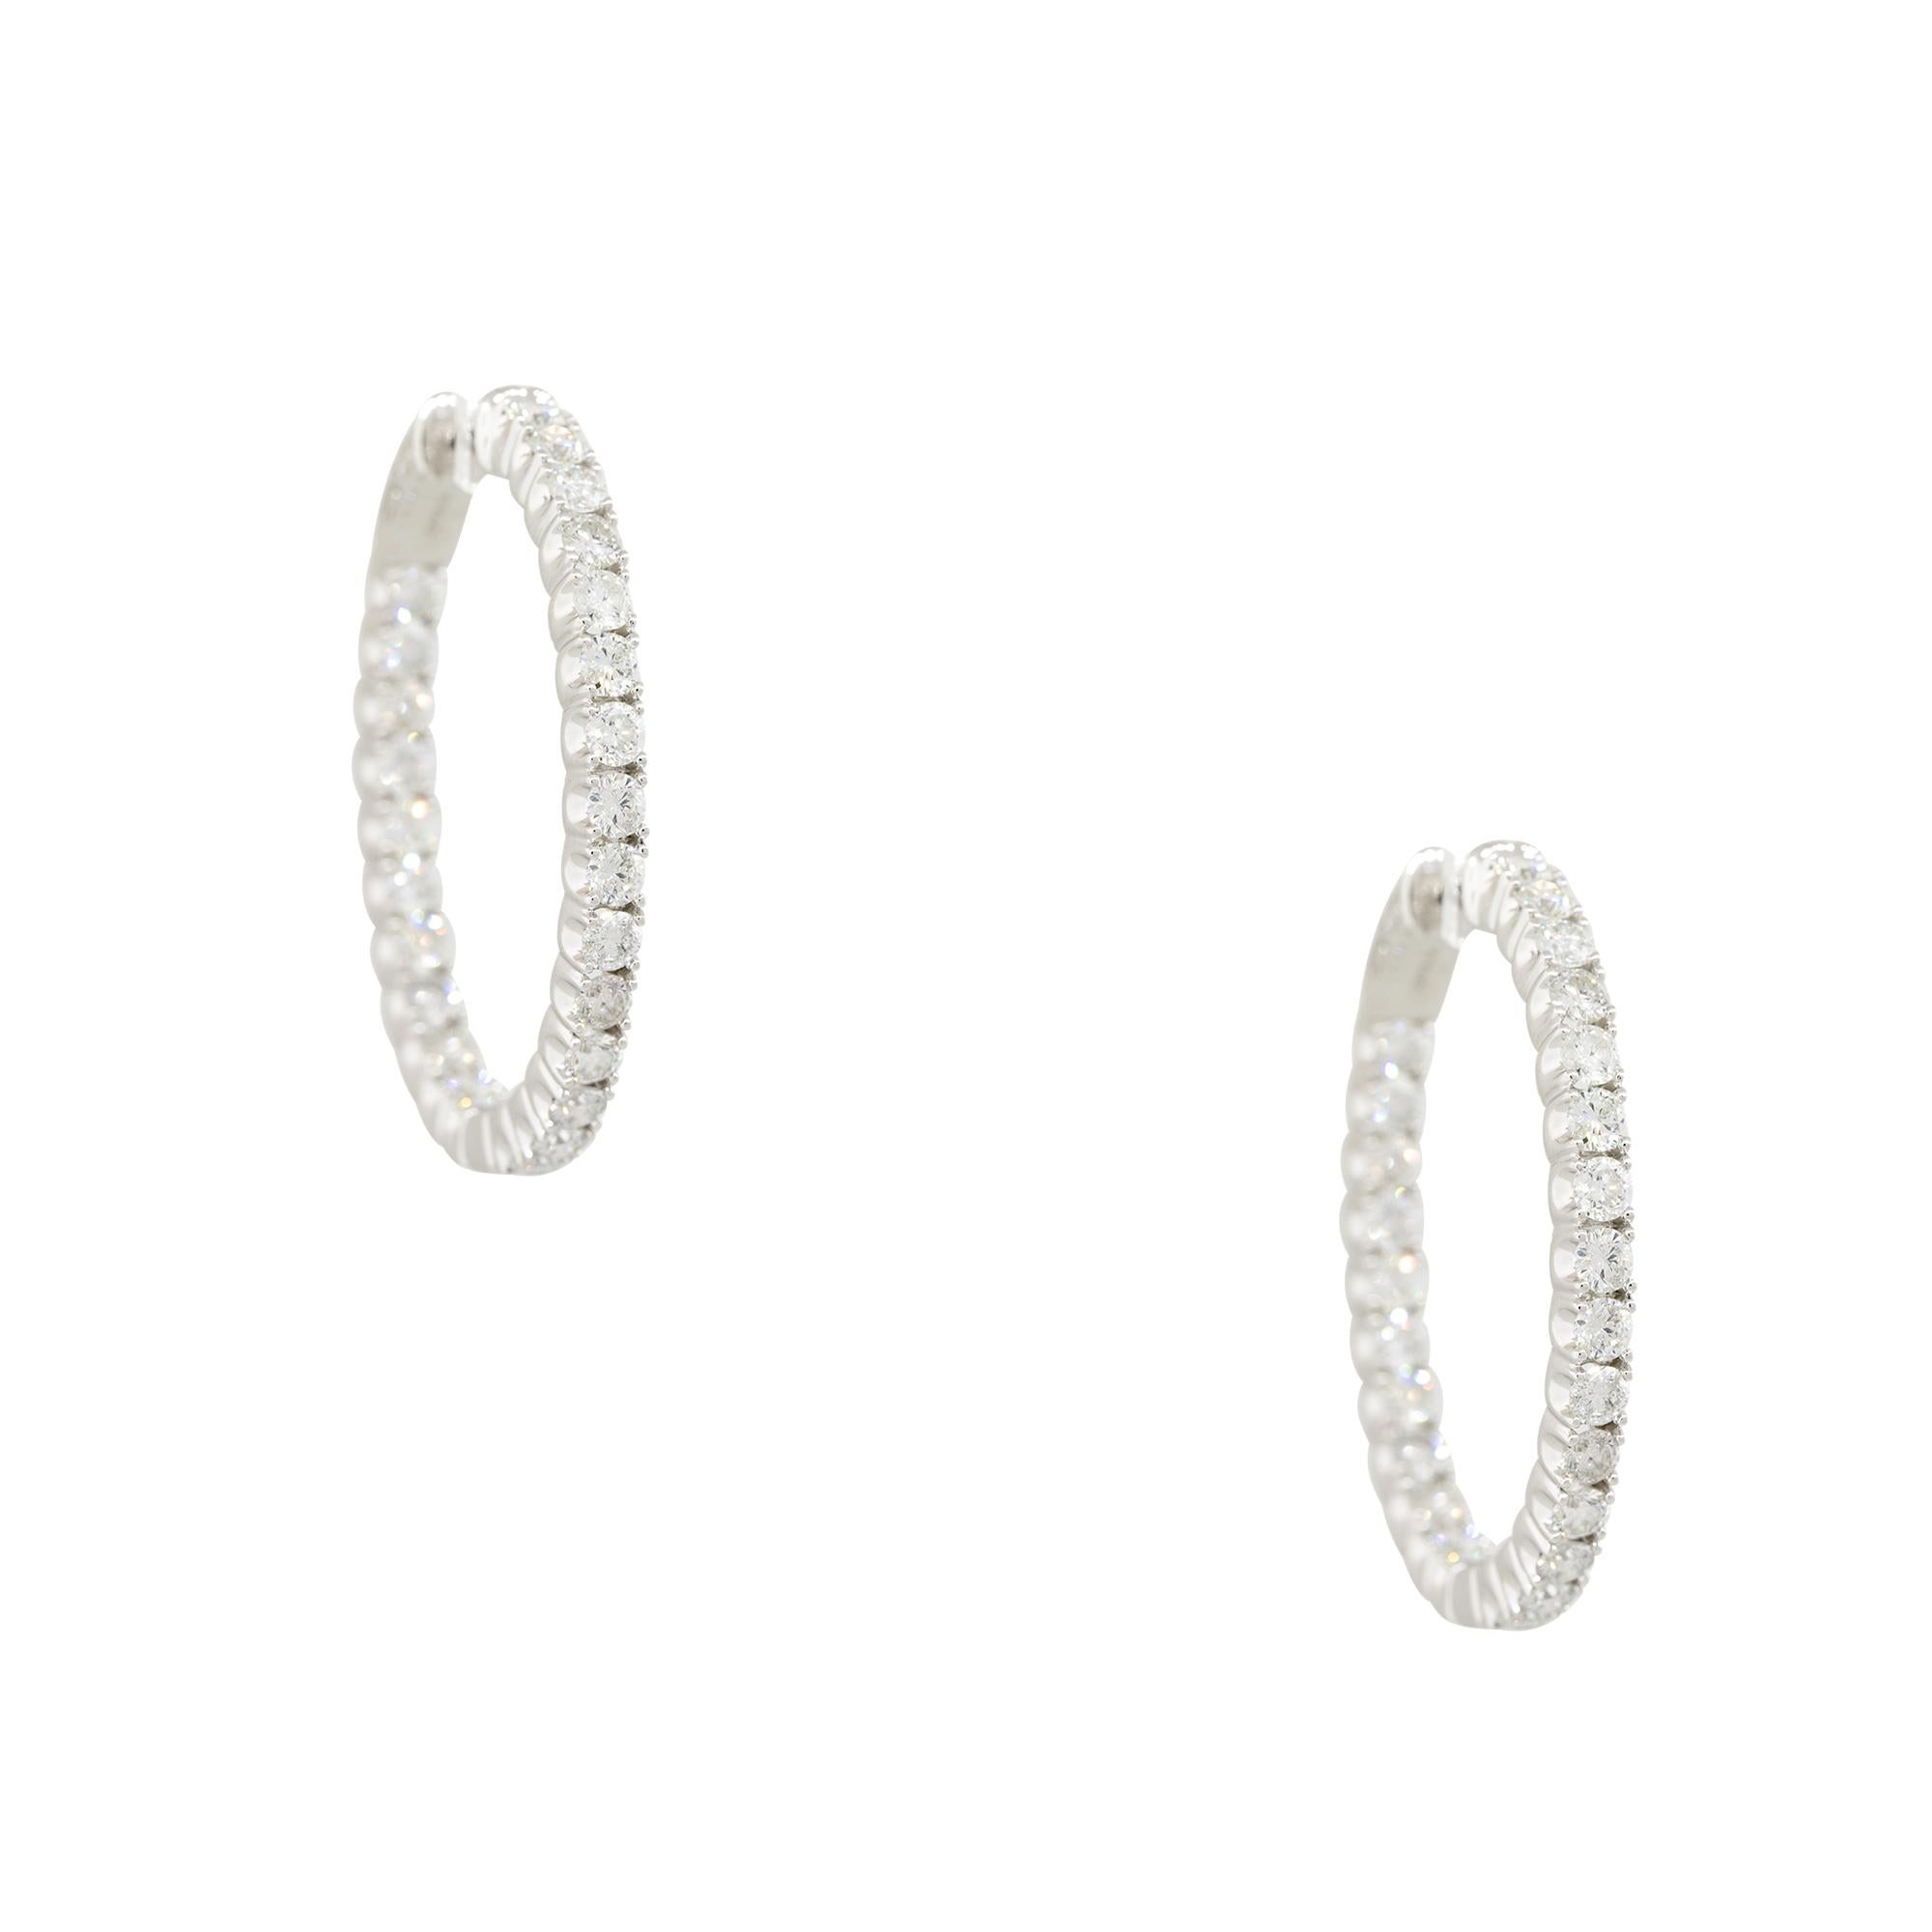 18k White Gold 5.60ctw Inside Out Large Diamond Hoop Earrings
Material: 18k White Gold
Diamond Details: Approximately 5.60ctw of Round Brilliant cut Diamonds. Diamonds are set inside out along the hoop earrings. There are 52 stones total
Earring